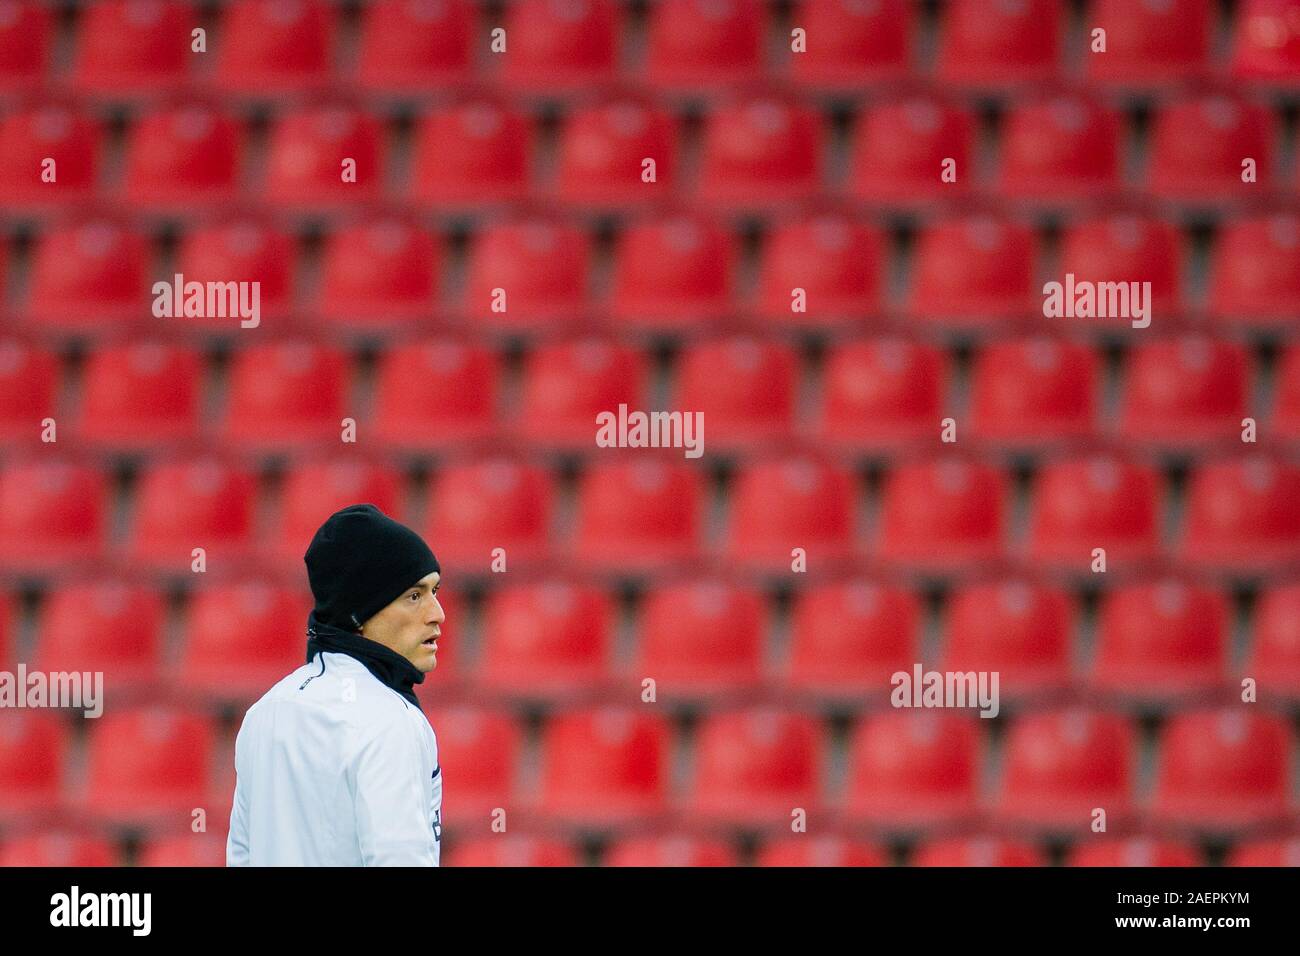 Leverkusen, Germany. 10th Dec, 2019. Soccer: Champions League, Bayer Leverkusen - Juventus Turin, Group stage, Group D, 6th matchday, training and press conference. Leverkusen's Charles Aranguiz participates in the training. Credit: Rolf Vennenbernd/dpa/Alamy Live News Stock Photo